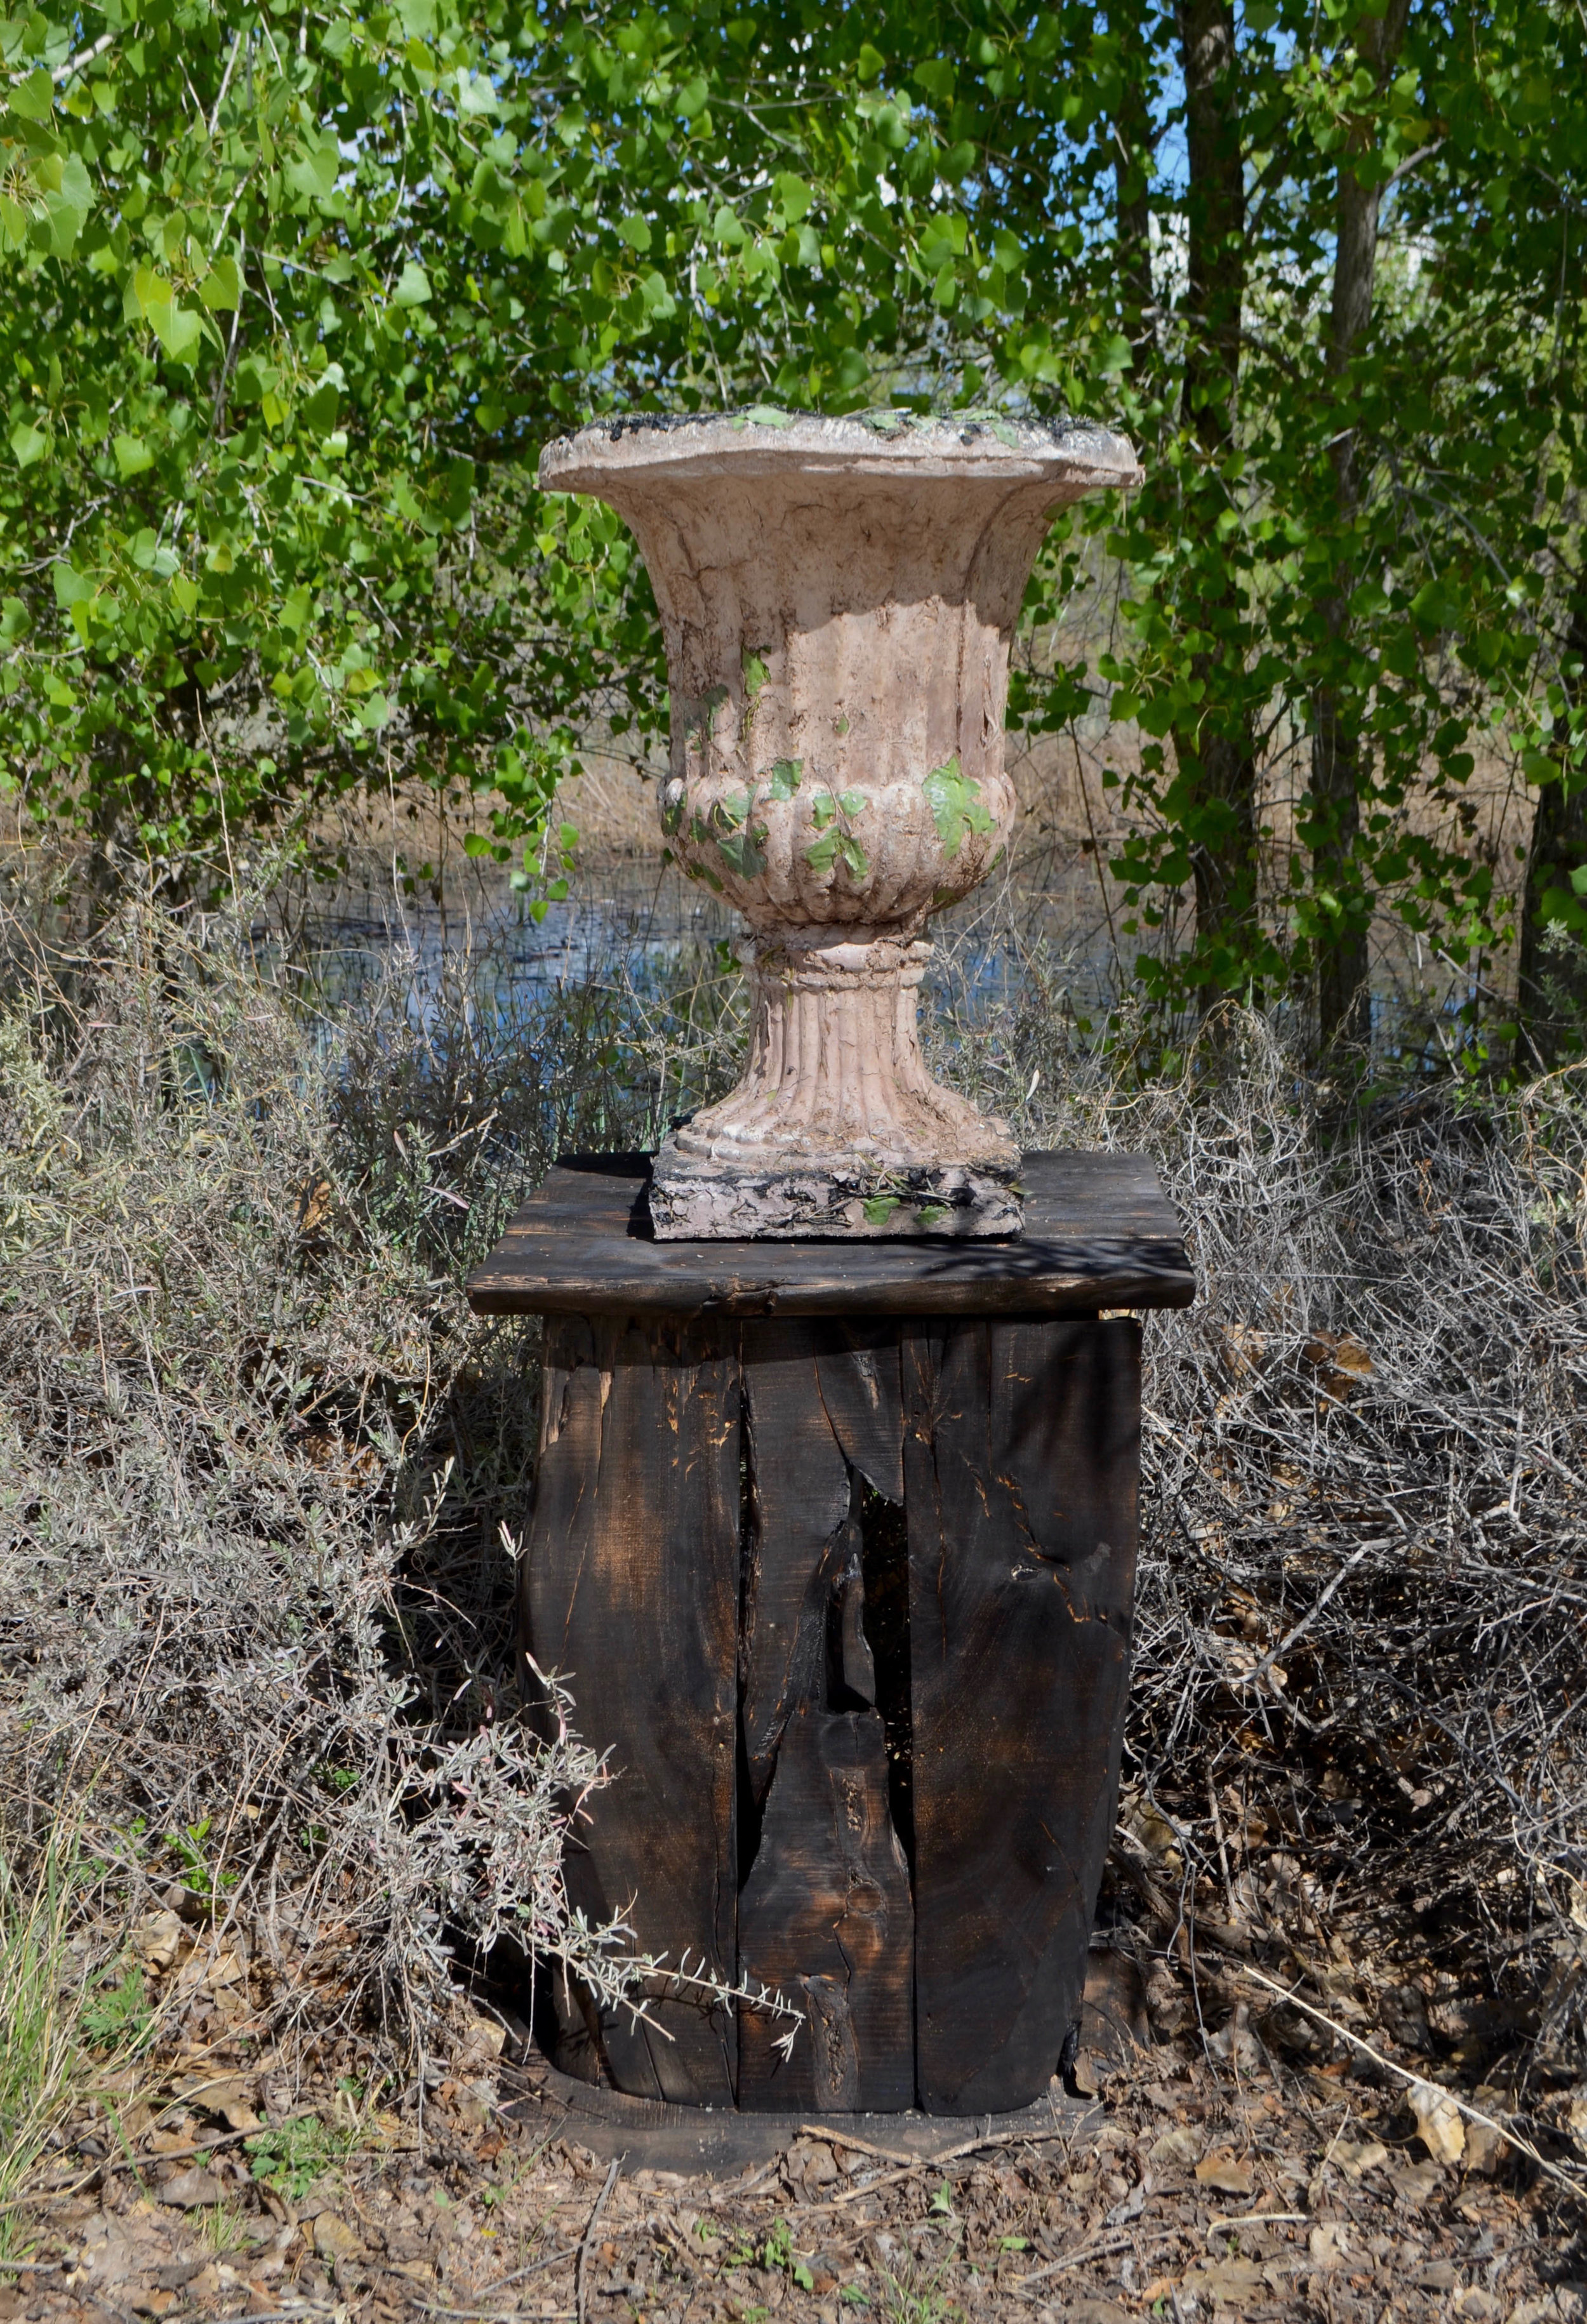  Drawing from the history of landscape architecture, and the use of urns as ornamental elements in formal garden settings, Memorials to the genii loci: Middle Rio Grande Basin is the first in a series of site-specific work that memorializes natural e